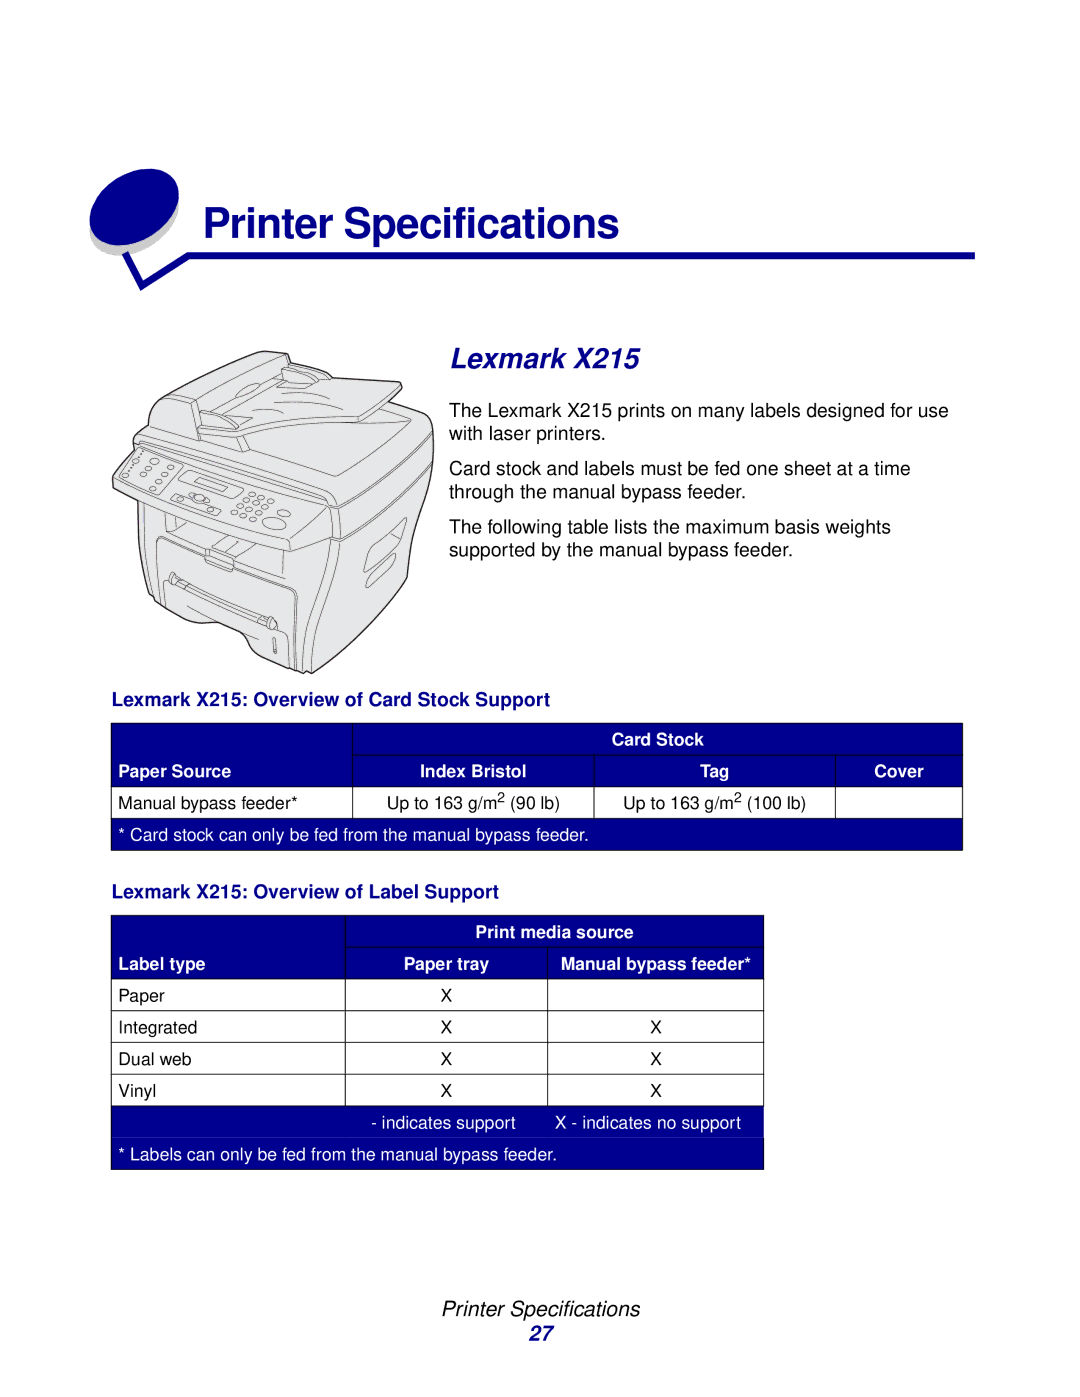 Lexmark Laser Printers manual Printer Specifications, Lexmark X215 Overview of Card Stock Support 